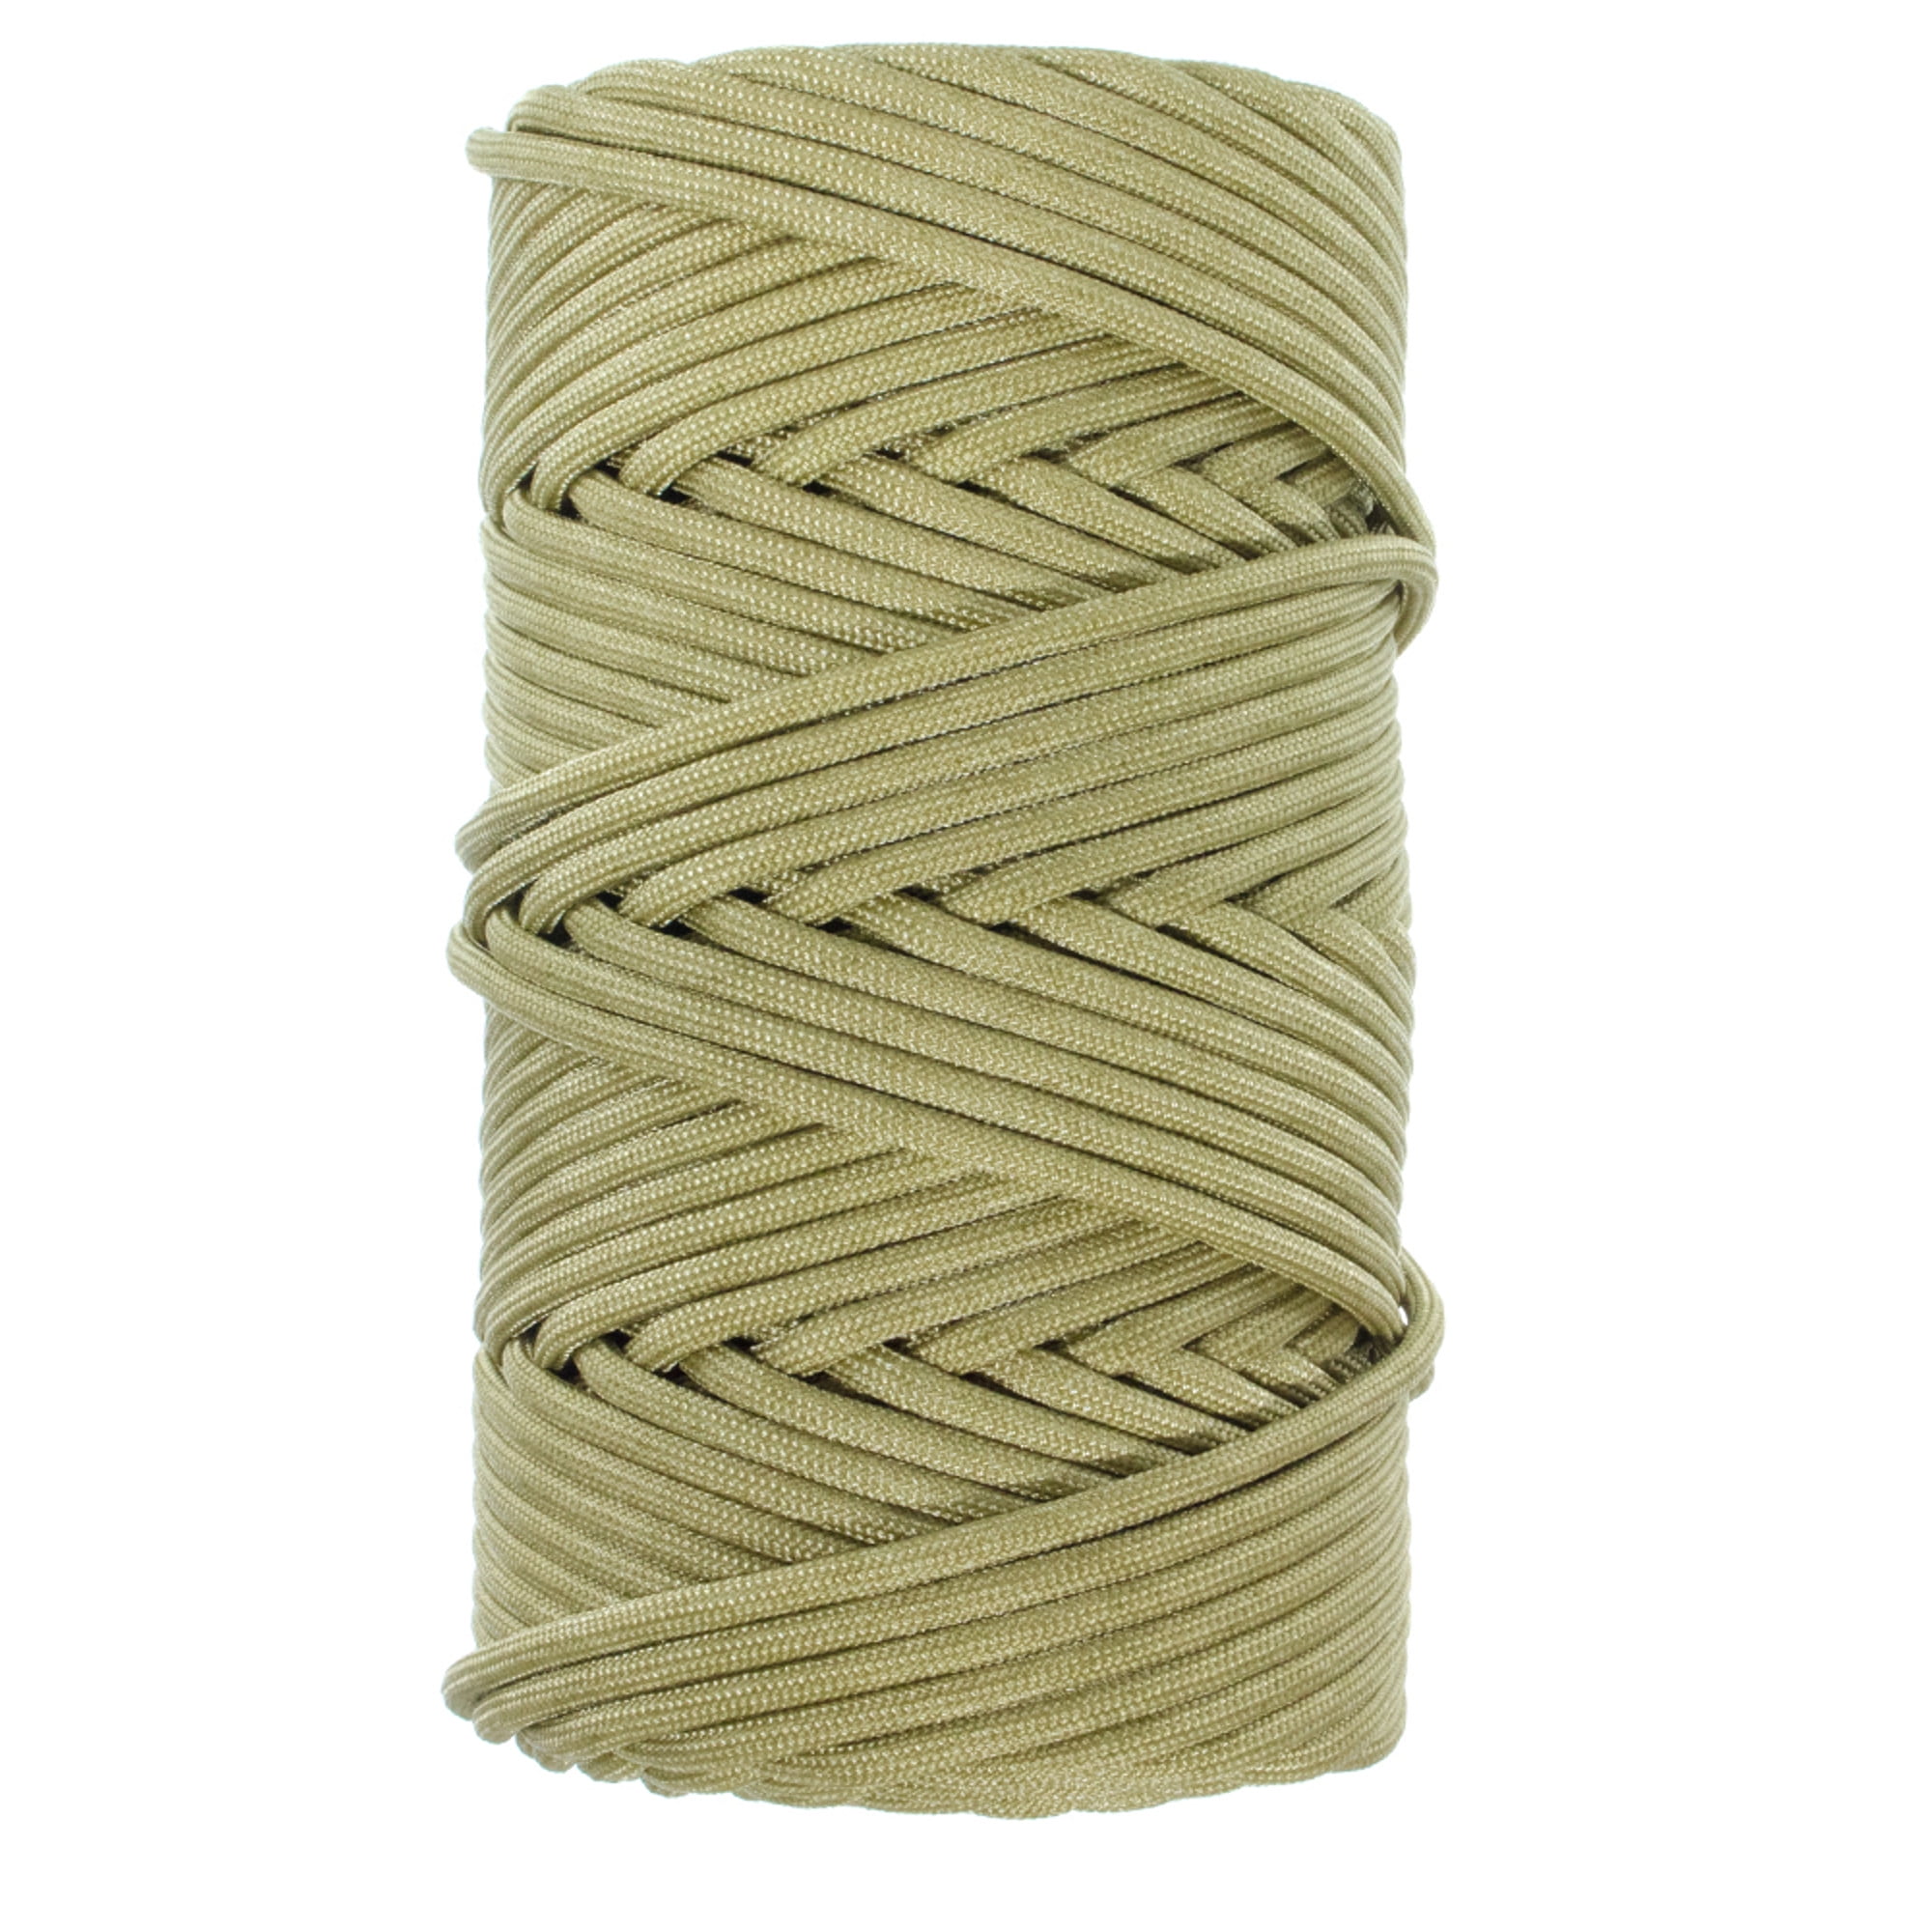 PARACORD PLANET Nylon Mil Spec Parachute 550 Cord Type III 7 Strand Paracord Over 200 Colors 10-1000 Choices